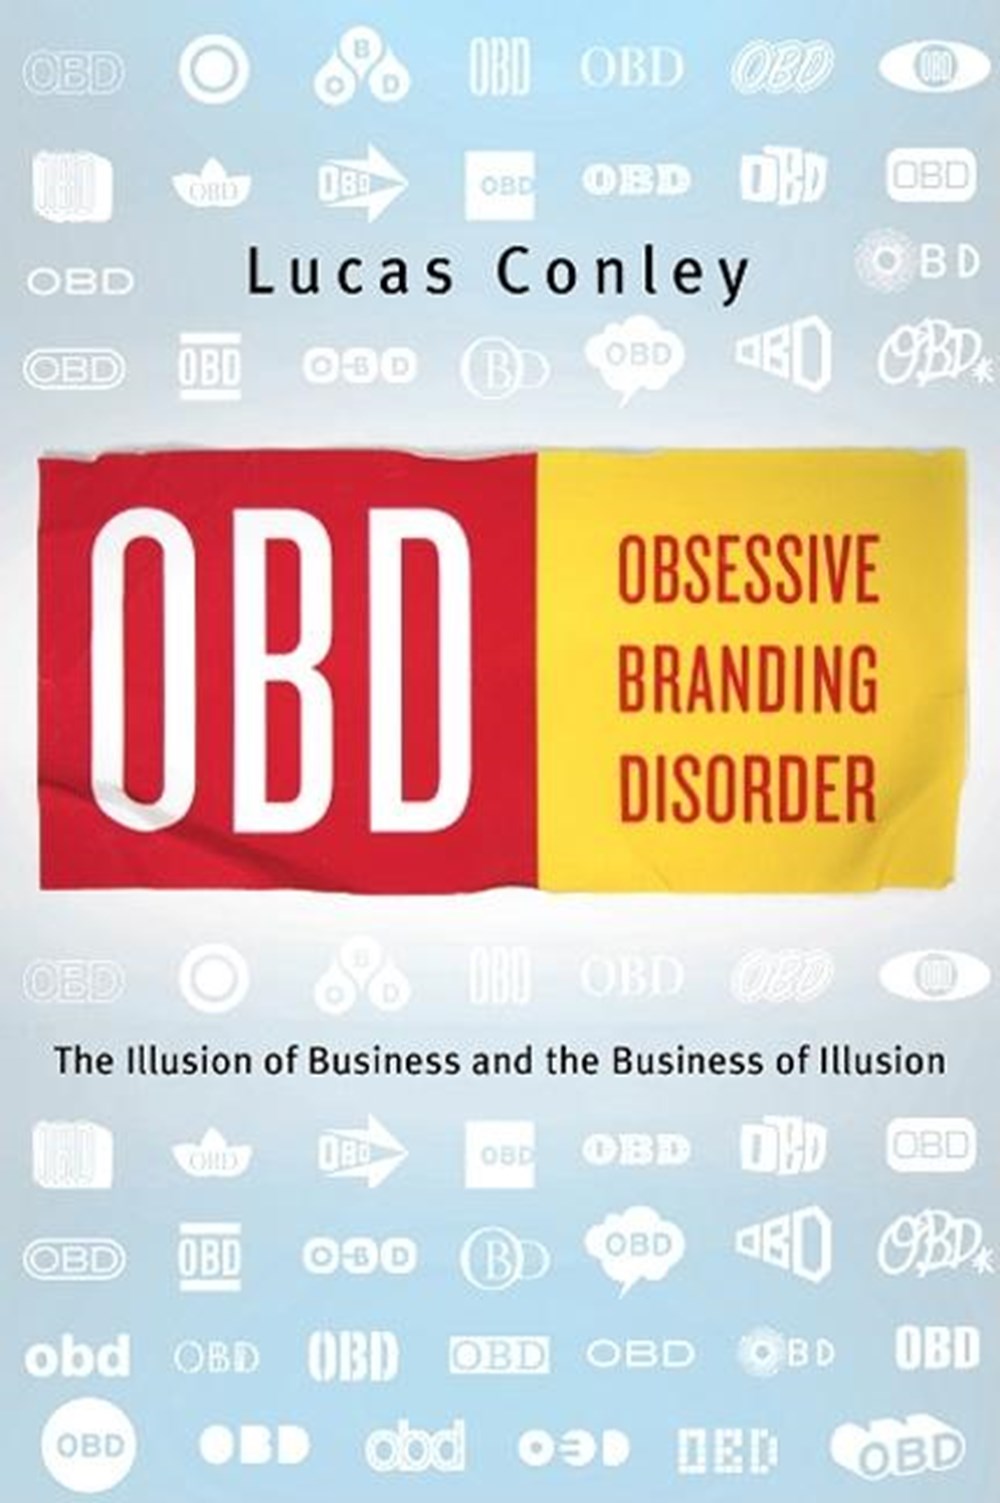 OBD Obsessive Branding Disorder: The Business of Illusion and the Illusion of Business